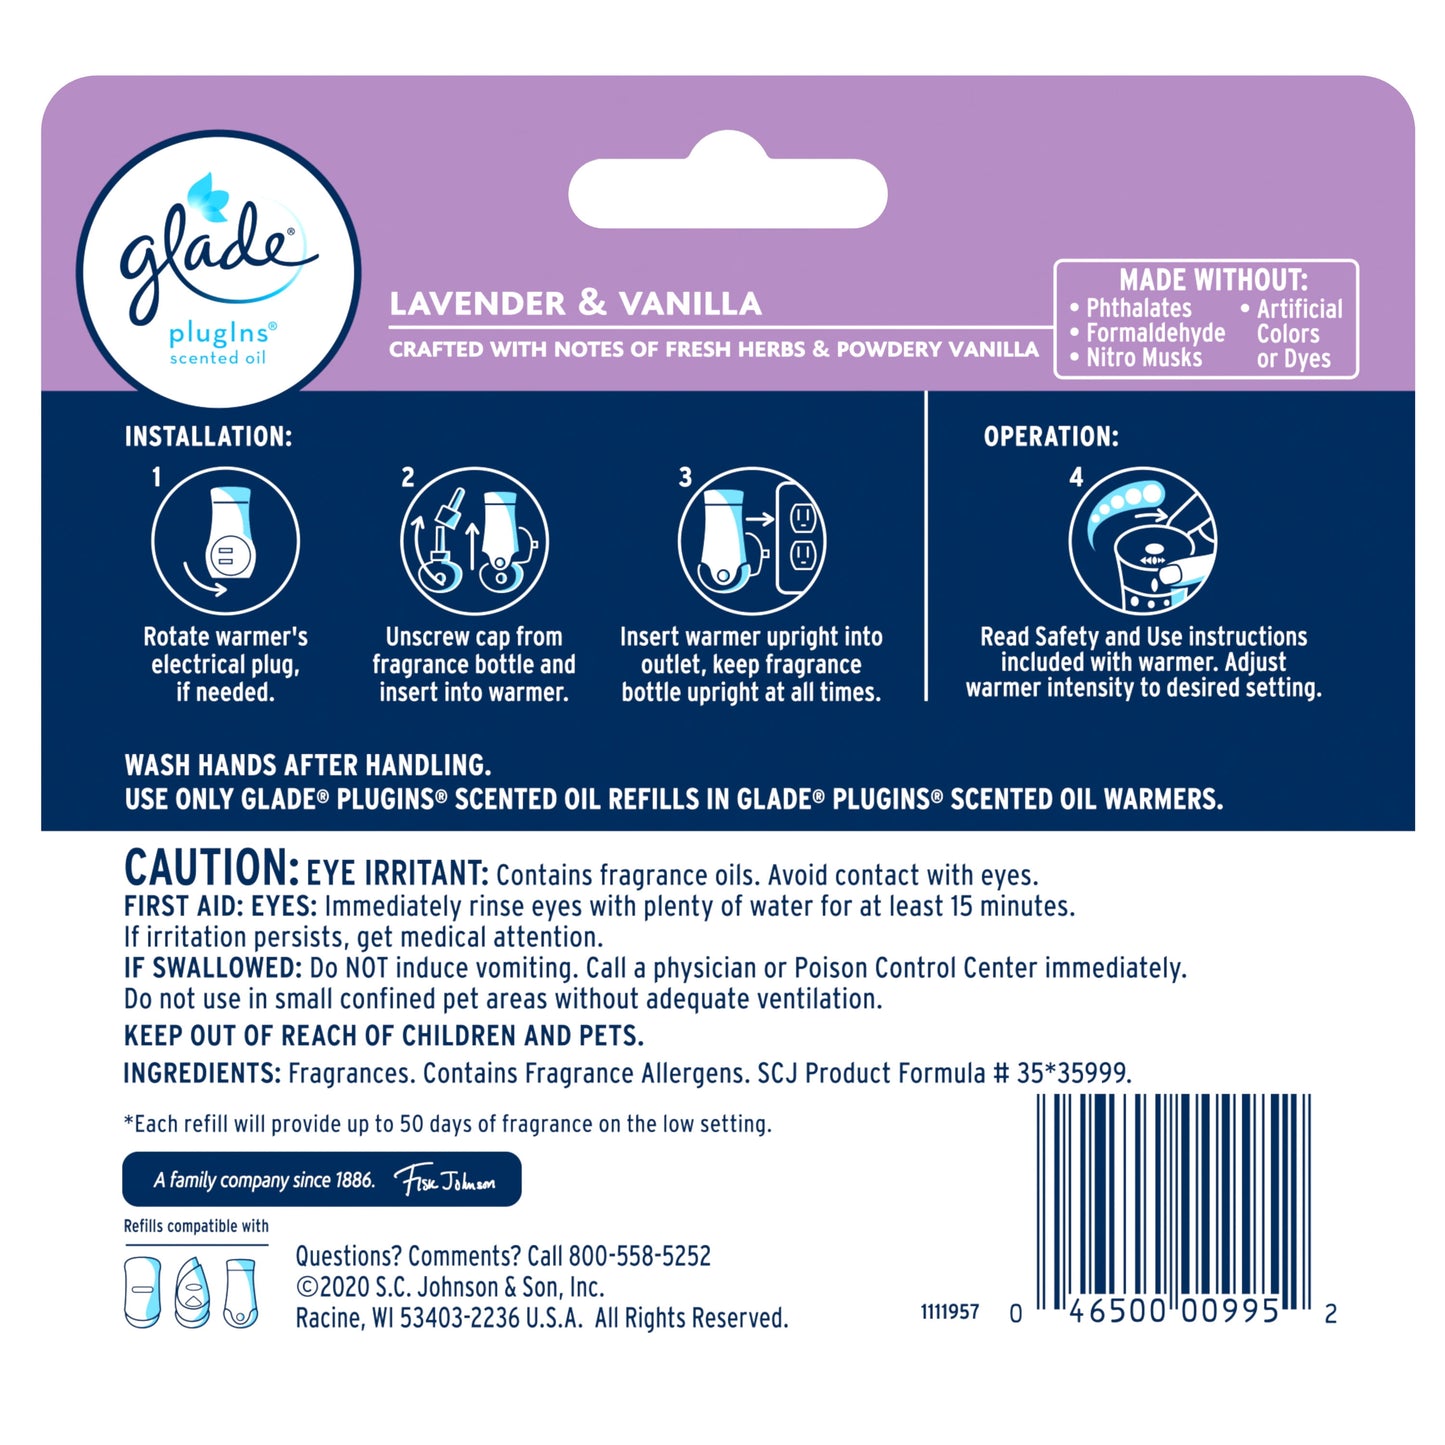 Glade PlugIns Refill 5 ct, Lavender & Vanilla, 3.35 FL. oz. Total, Scented Oil Air Freshener Infused with Essential Oils